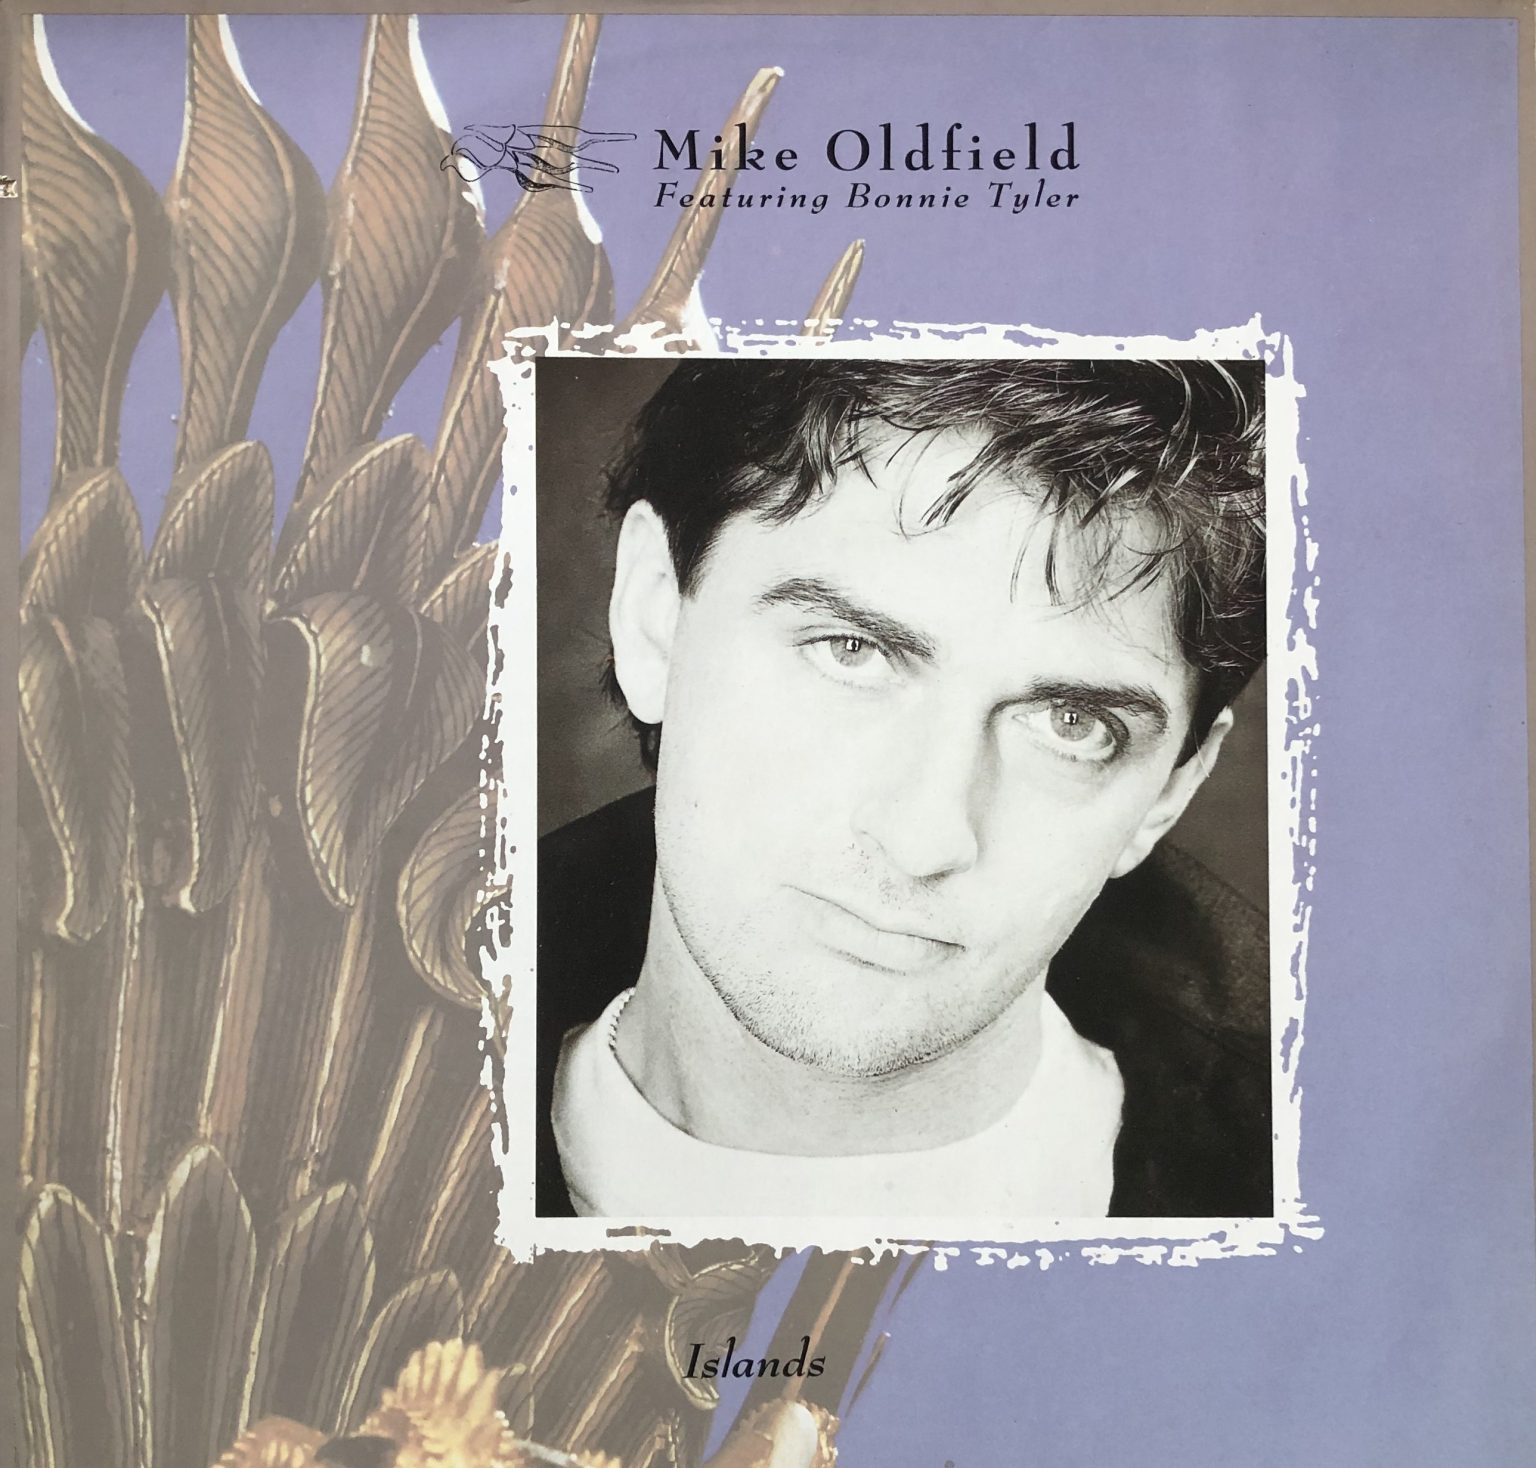 Mike Oldfield Featuring Bonnie Tyler – Islands LP